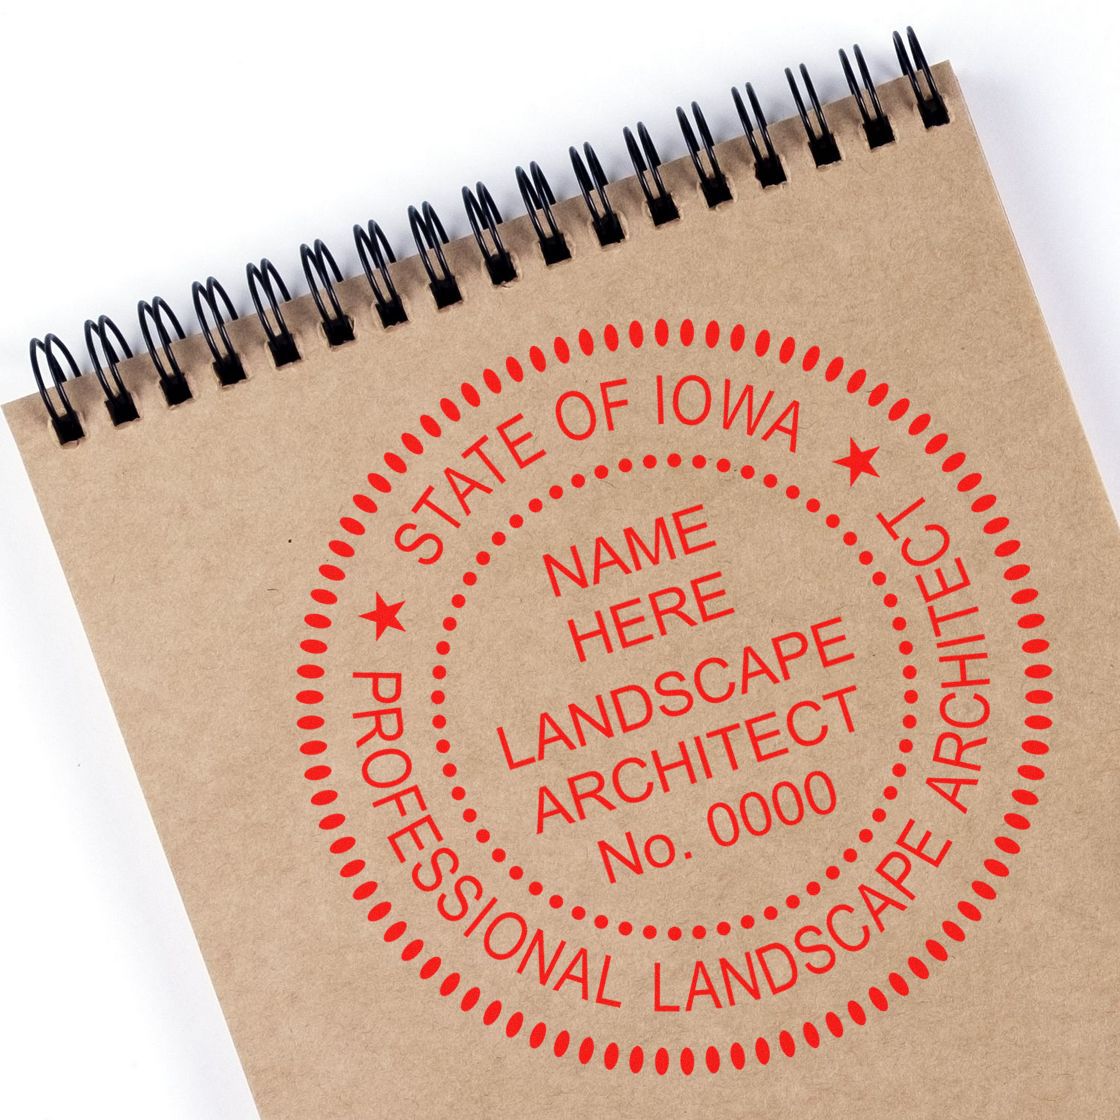 A stamped impression of the Slim Pre-Inked Iowa Landscape Architect Seal Stamp in this stylish lifestyle photo, setting the tone for a unique and personalized product.